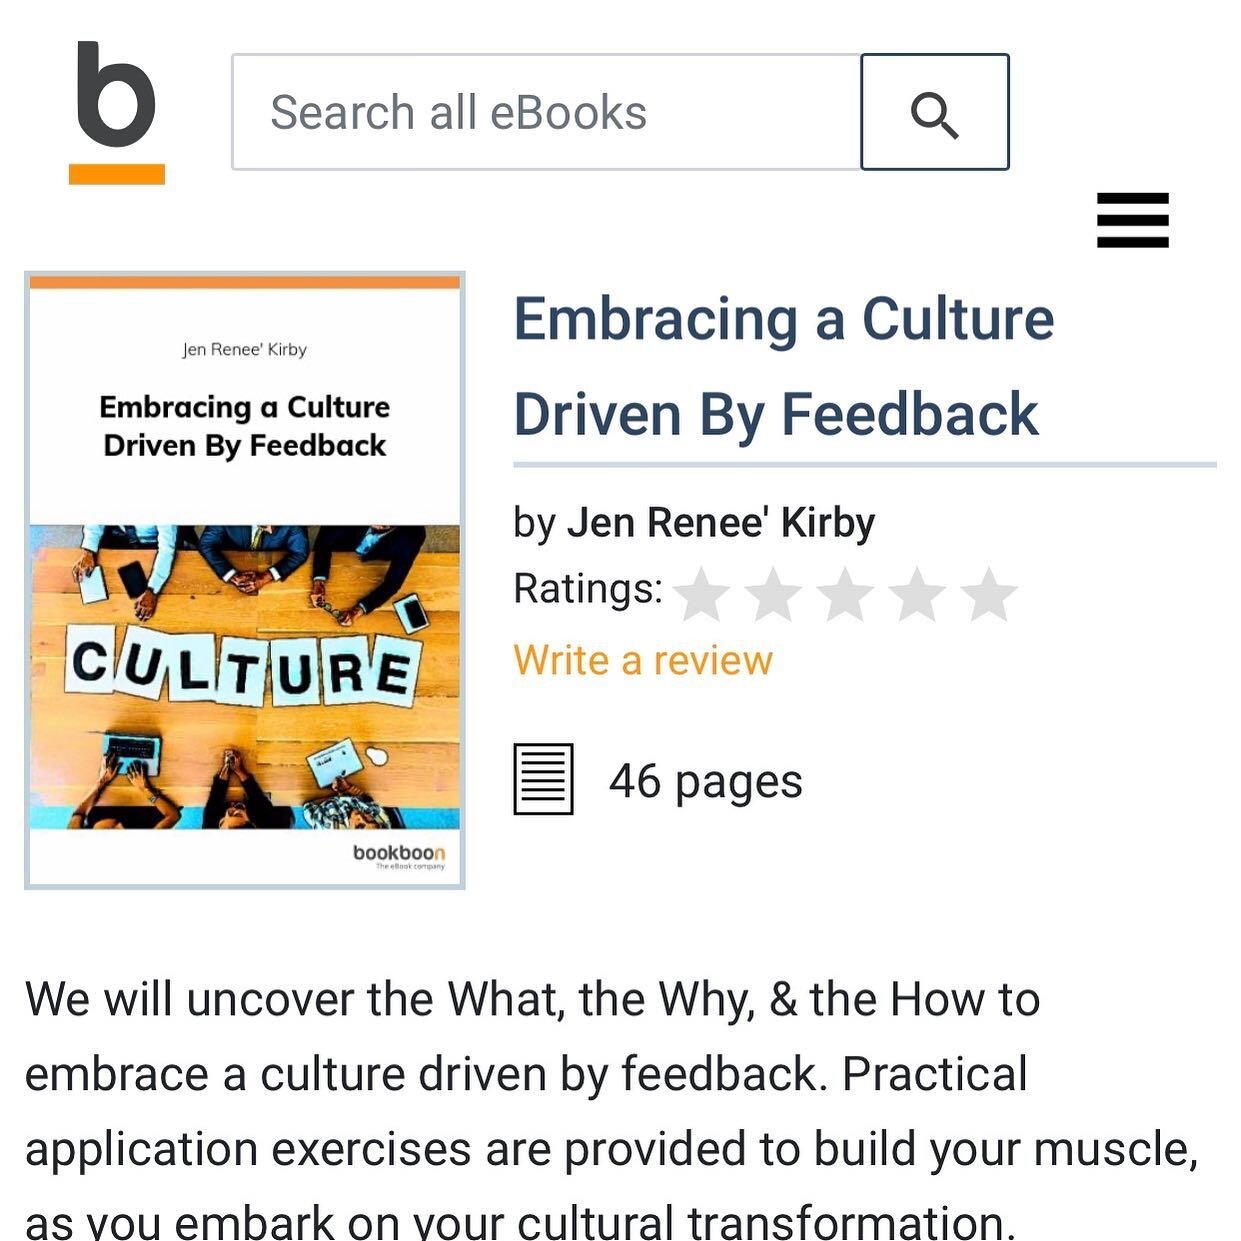 Check out my recently published book.

https://bookboon.com/en/embracing-a-culture-driven-by-feedback-ebook